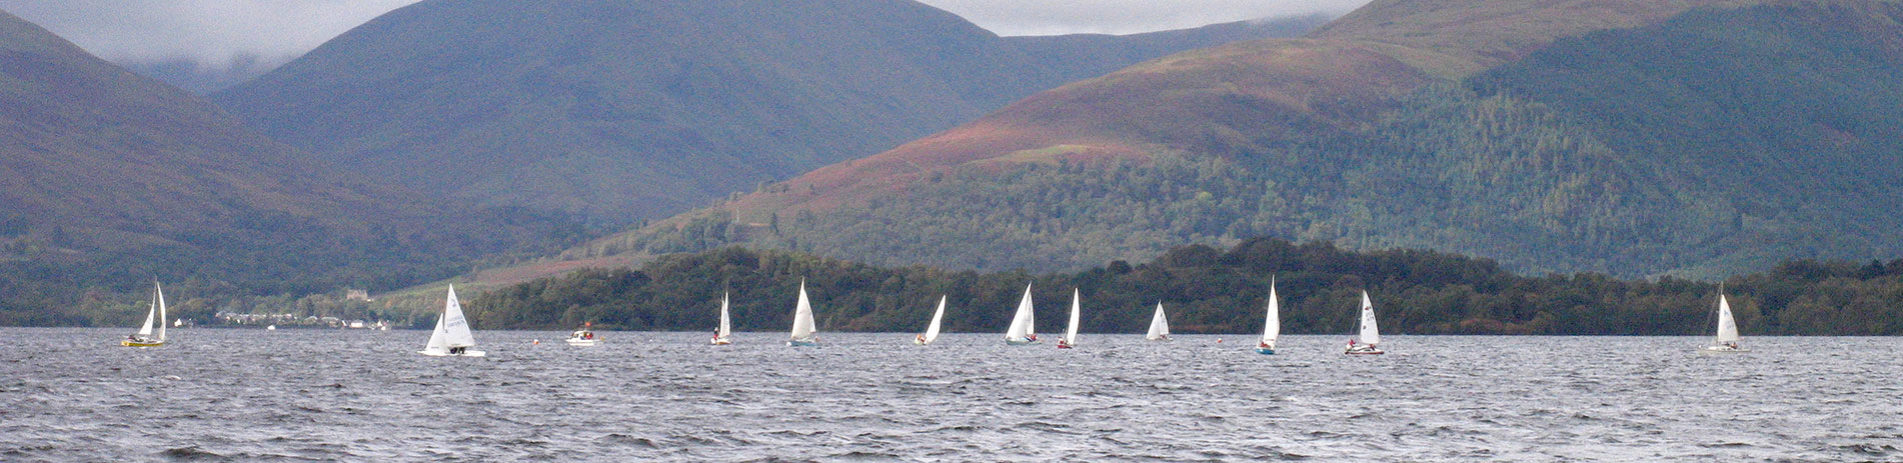 several-sailing-boats-with-white-veils-in-the-distance-on-loch-and-surrounding-high-hills-covered-by-forests-on-the-right